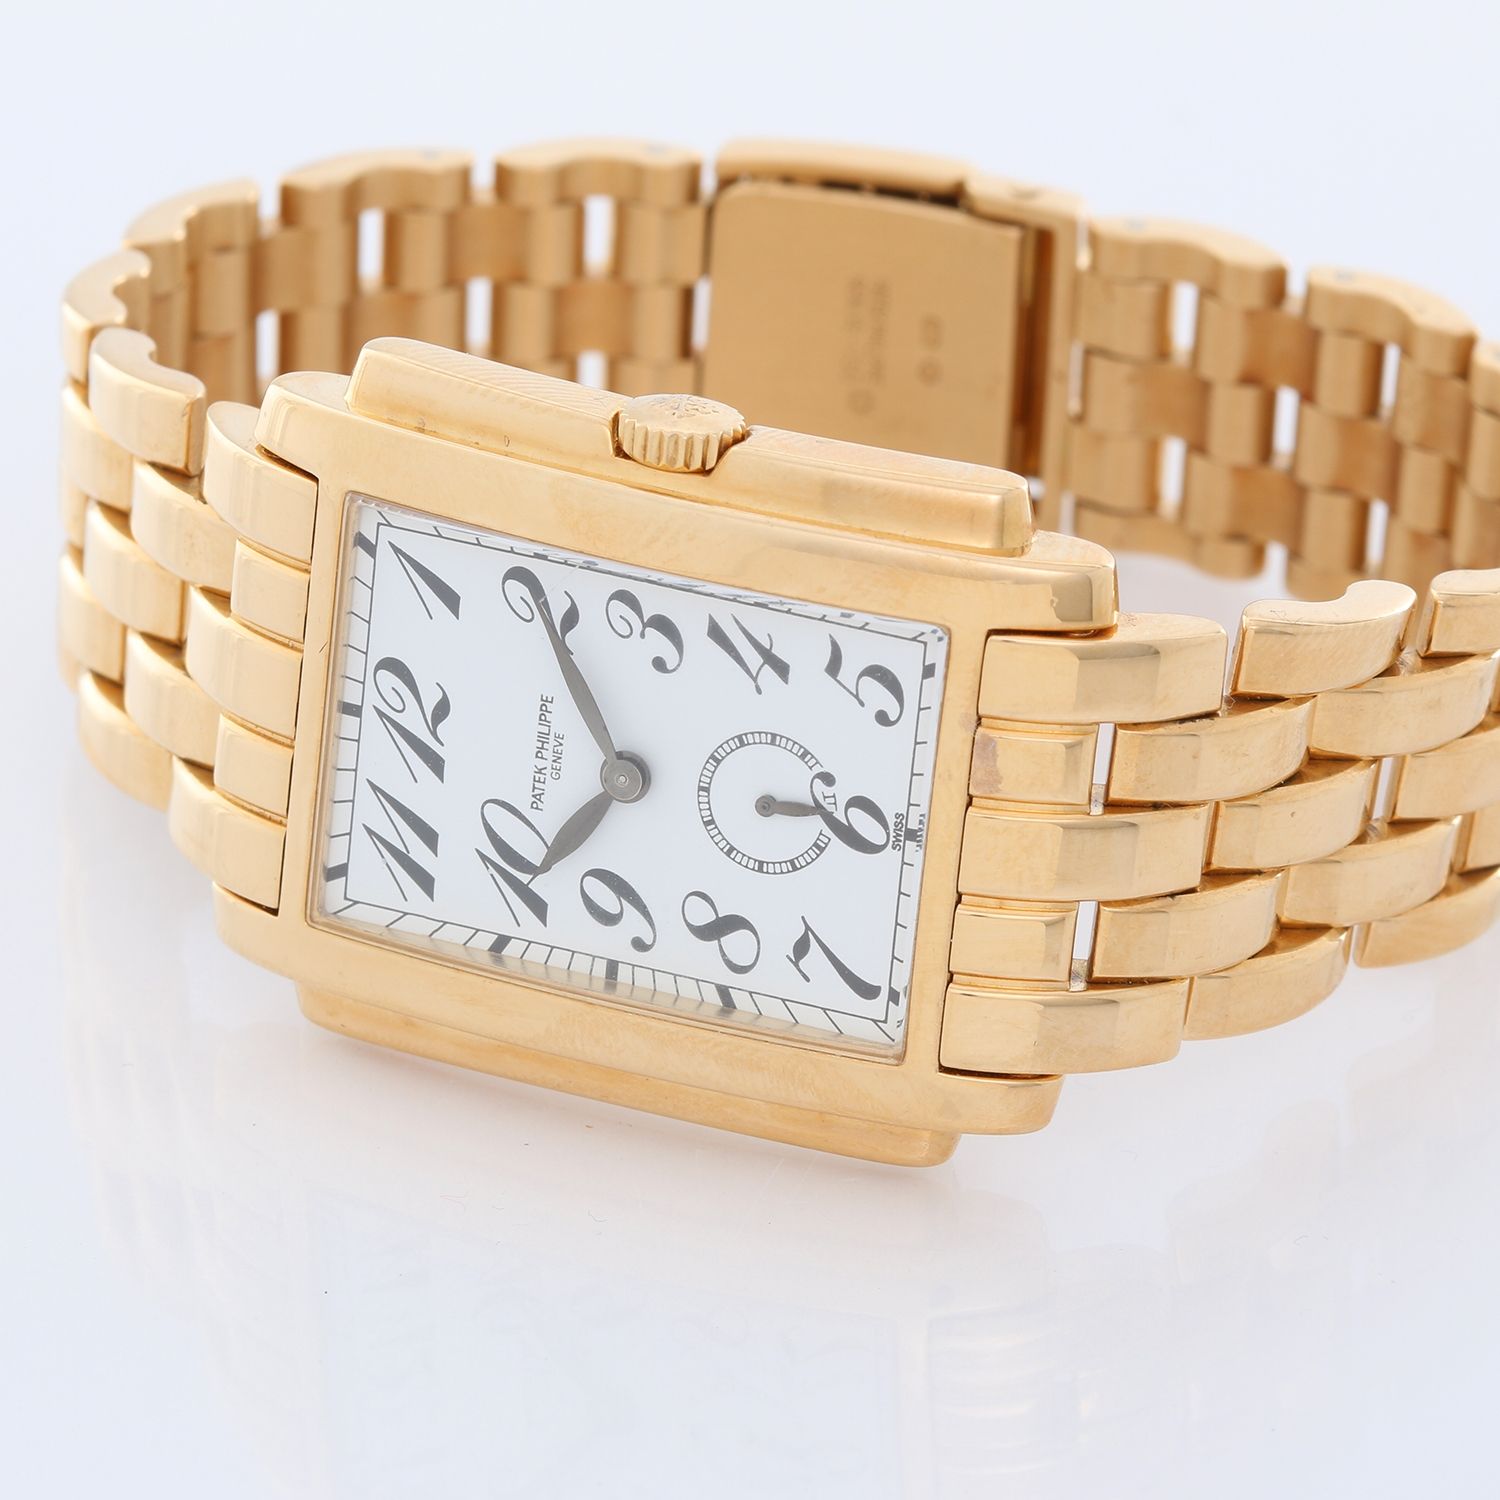 PATEK PHILIPPE  REFERENCE 4224/1 A YELLOW GOLD RECTANGULAR